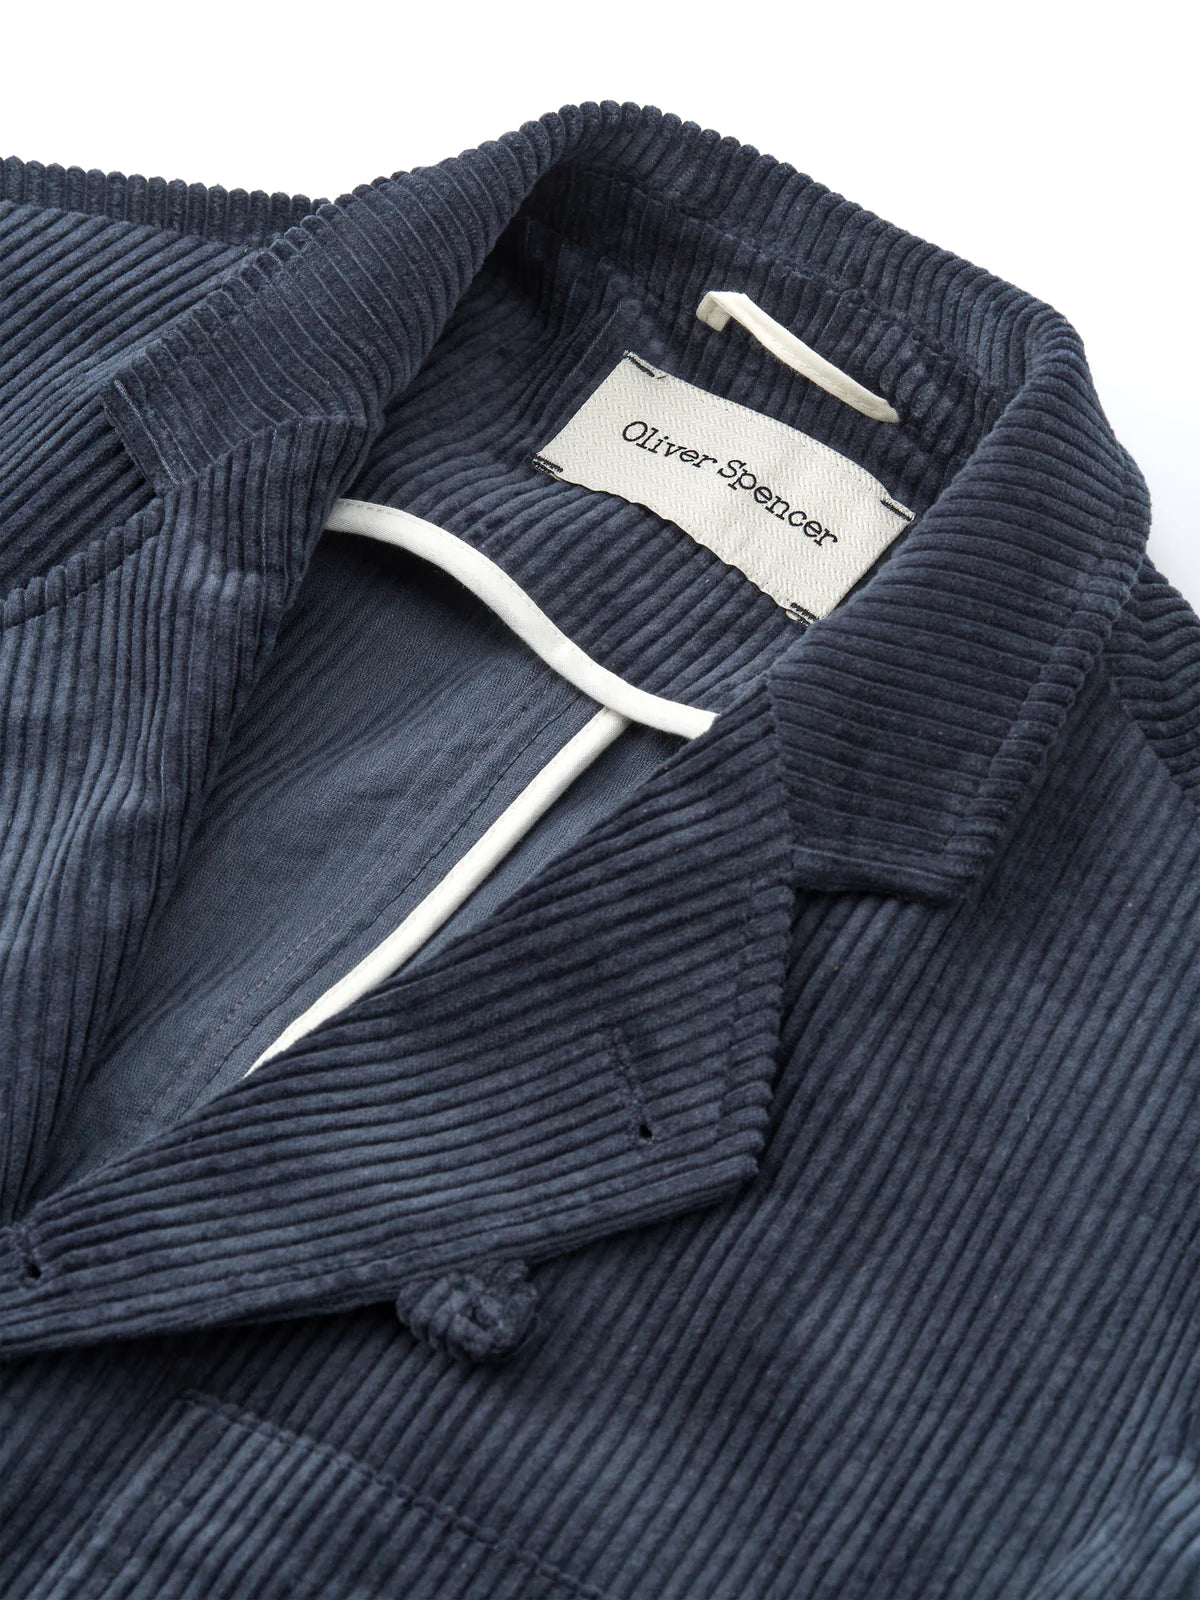 SOLMS JACKET - BLUE CORD